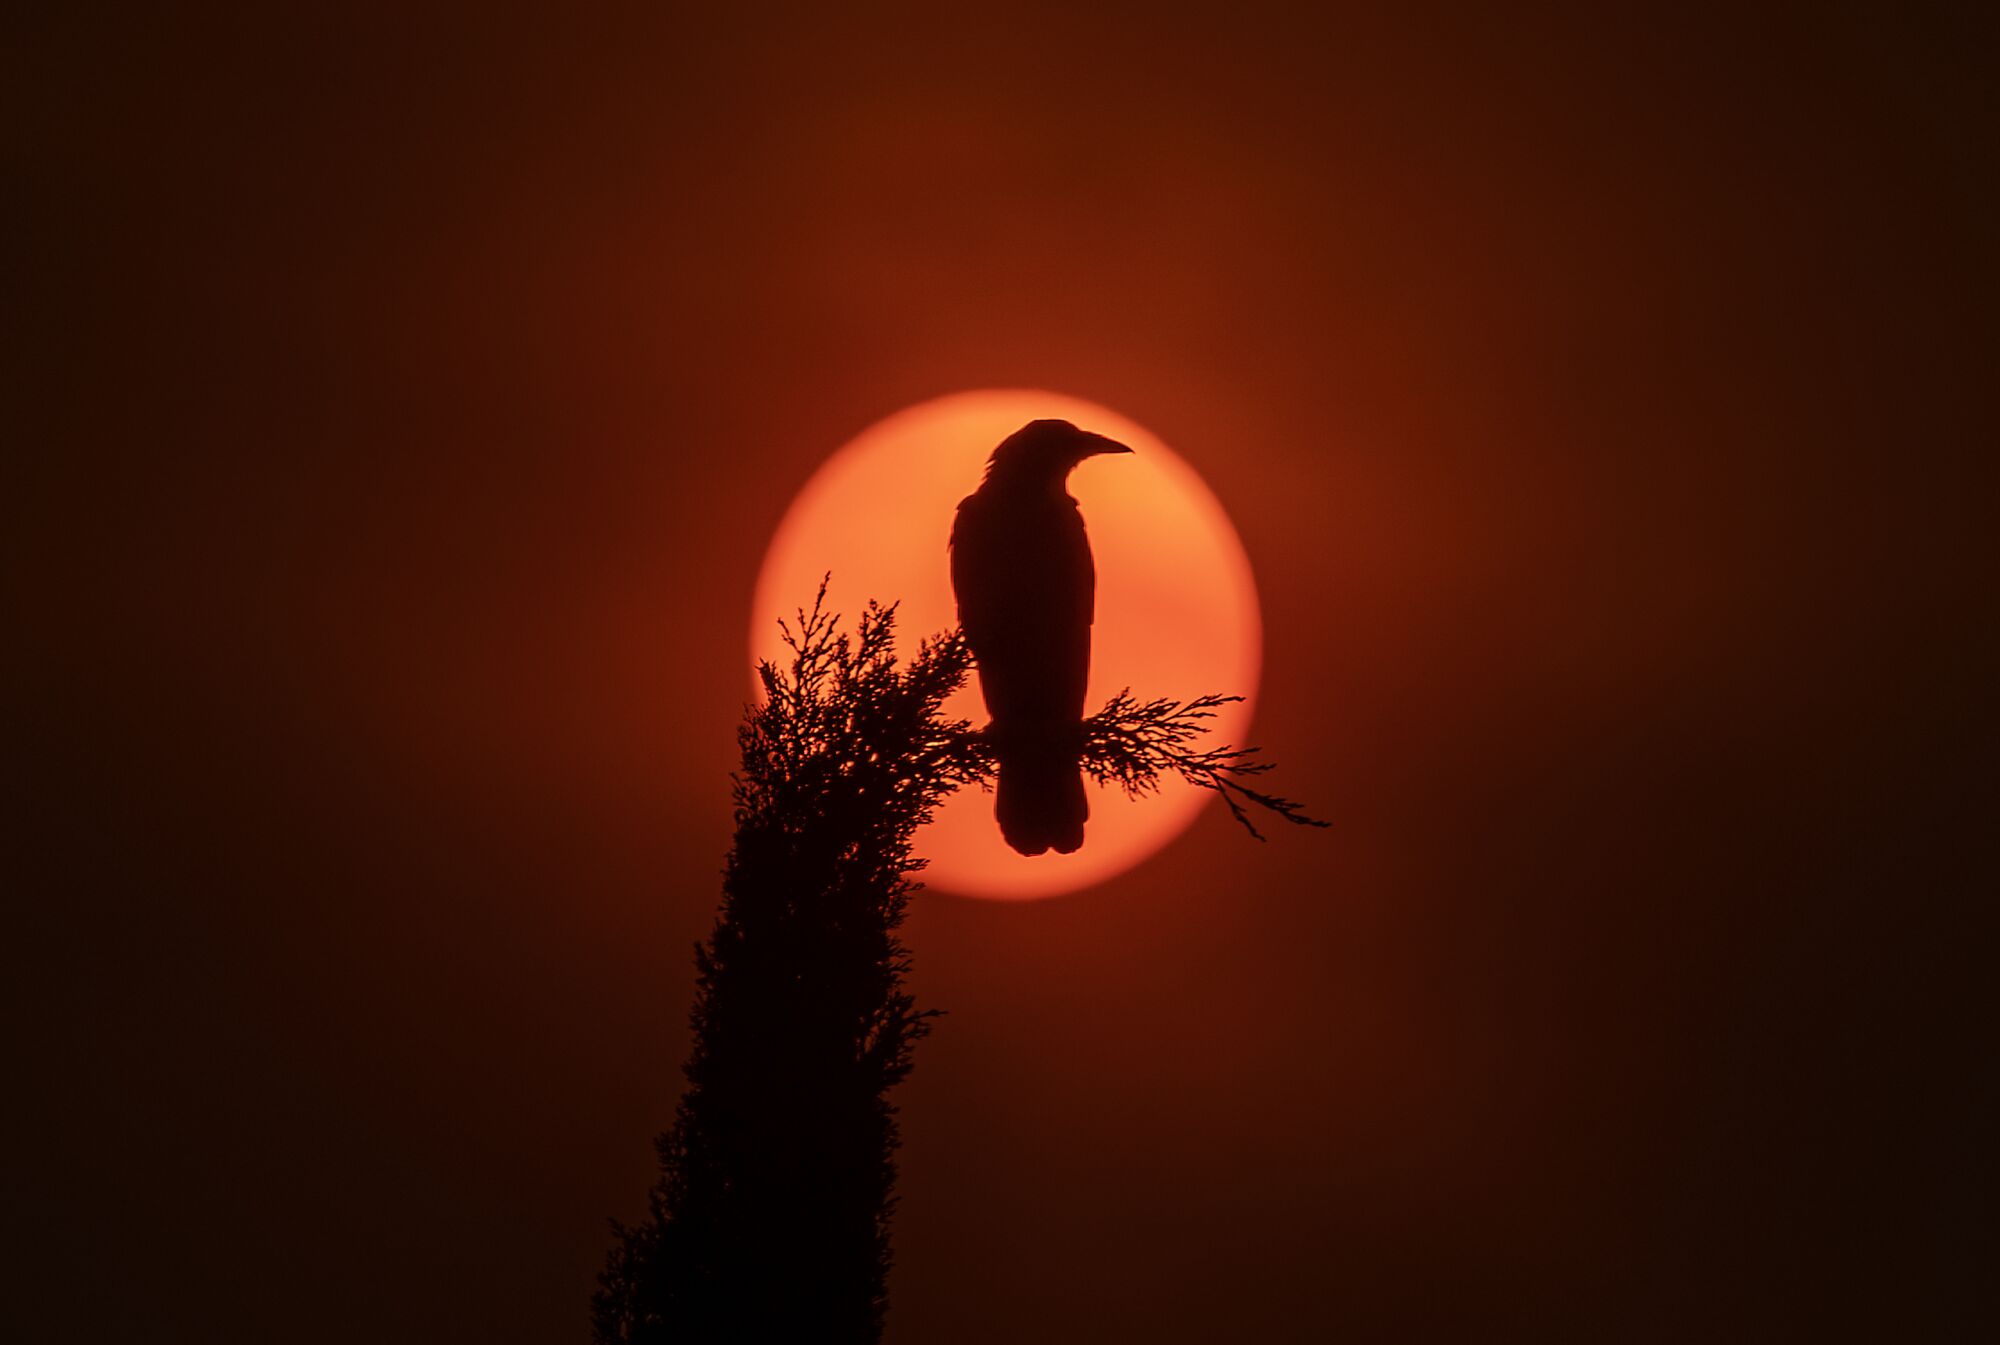 A crow sitting on a cypress tree in Garden Grove is silhouetted by the sun partially obscured by ash from Southland wildfires